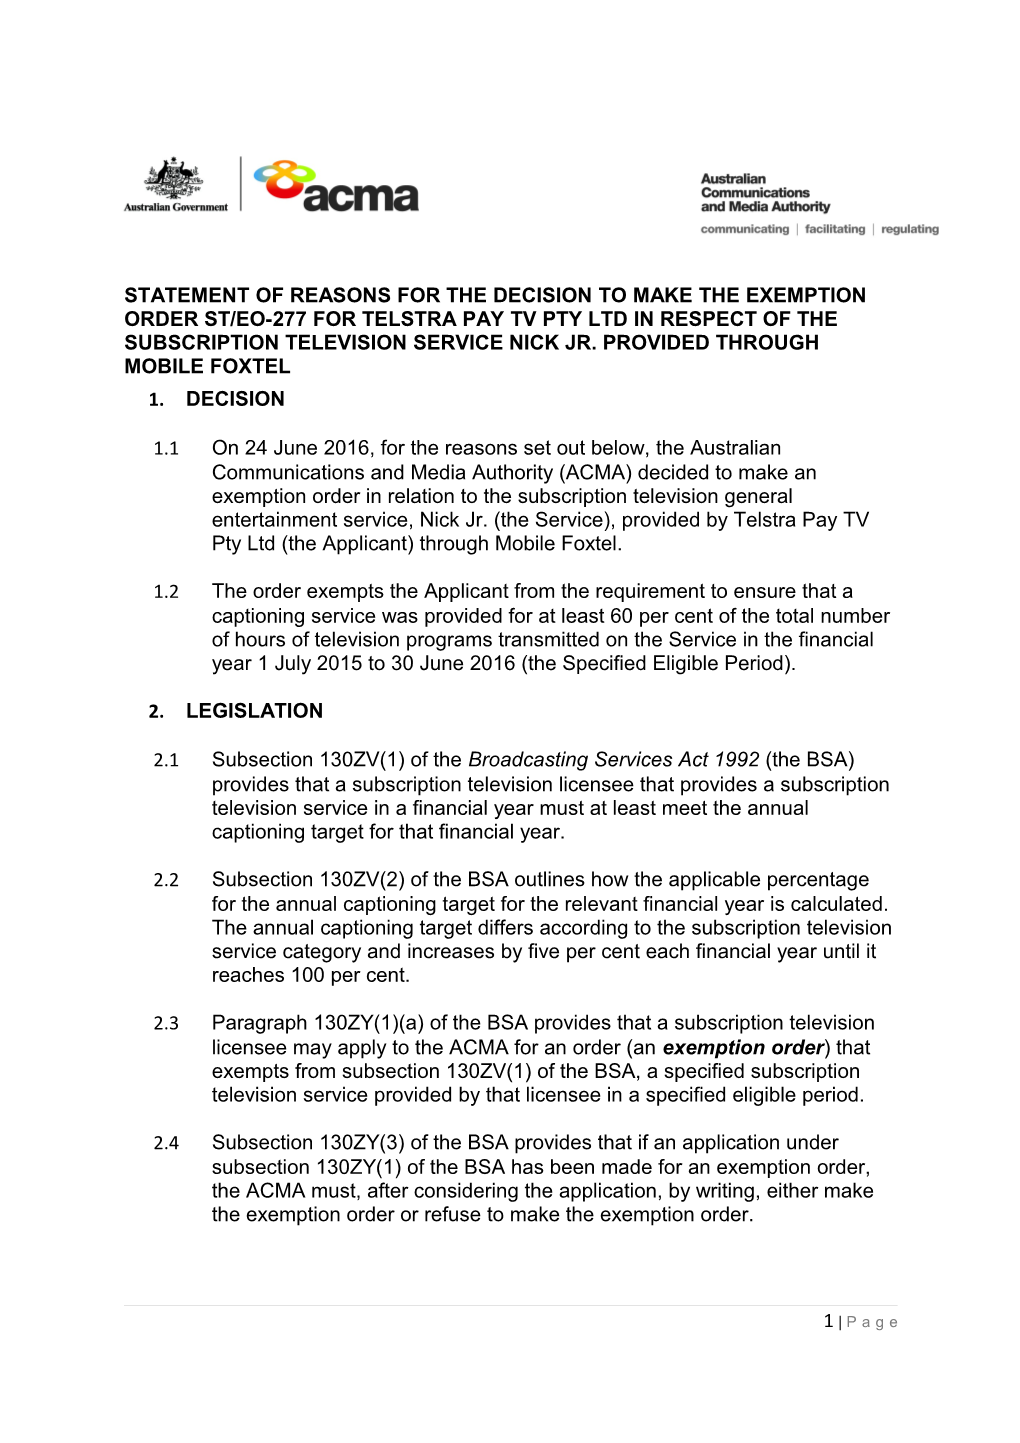 Statement of Reasons for the Decision to Make the Exemption Order St/Eo-277For Telstra